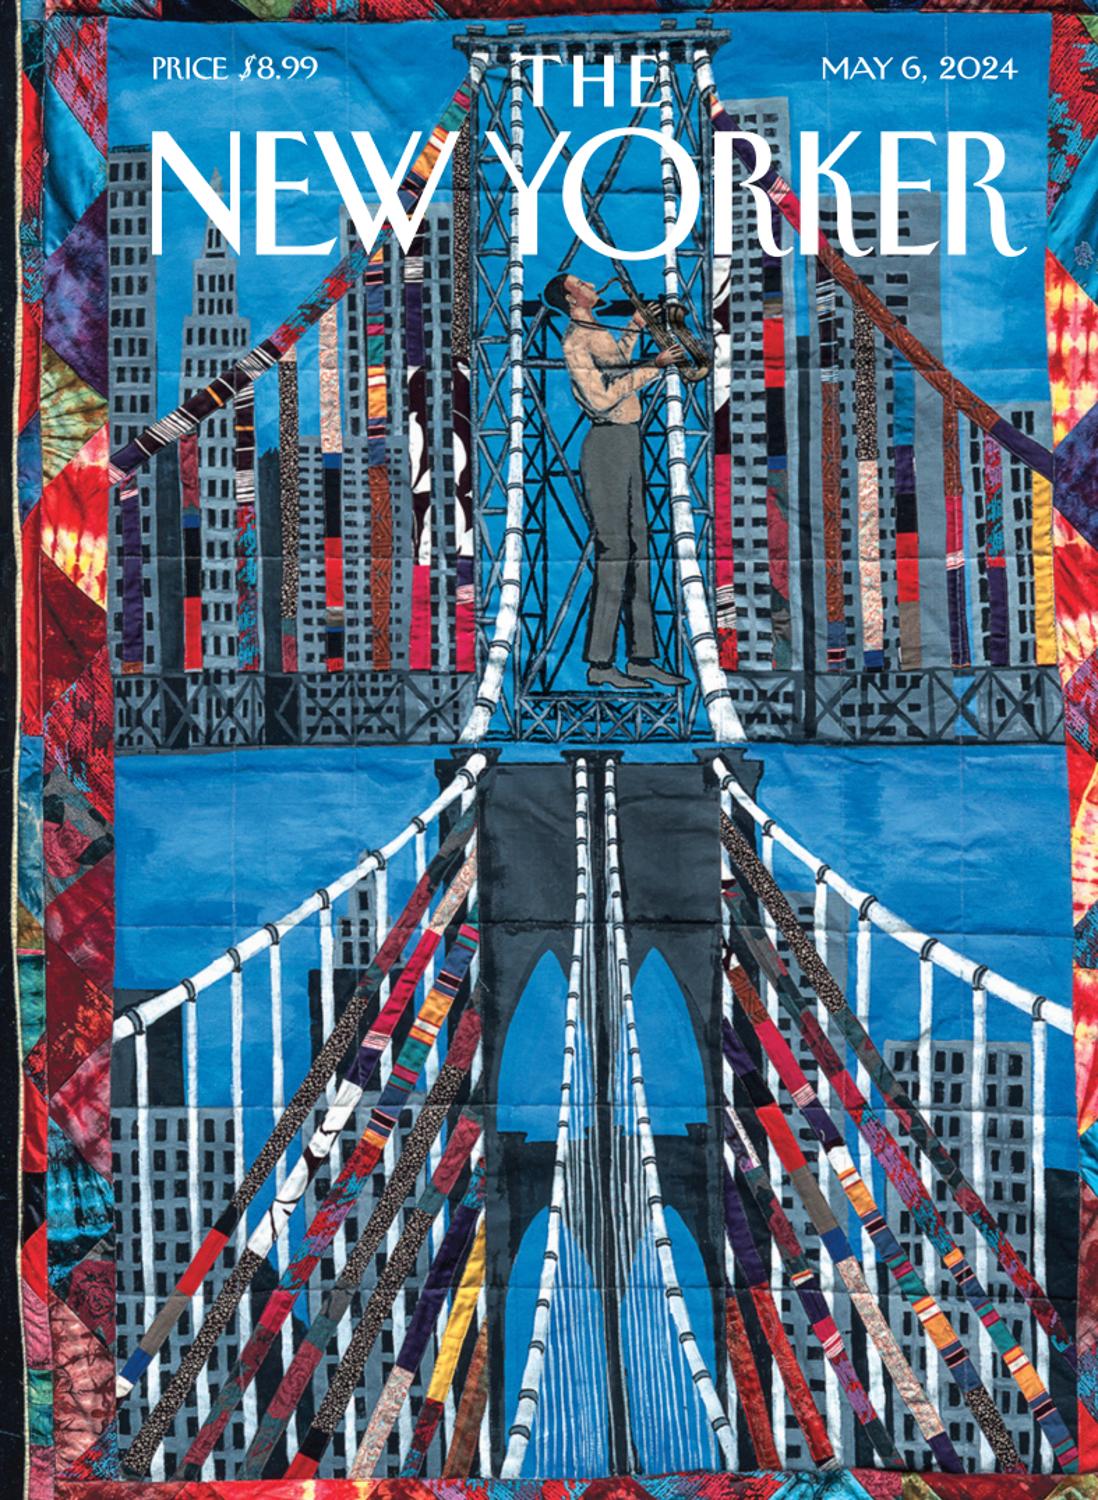 The New Yorker – May 6, 2024